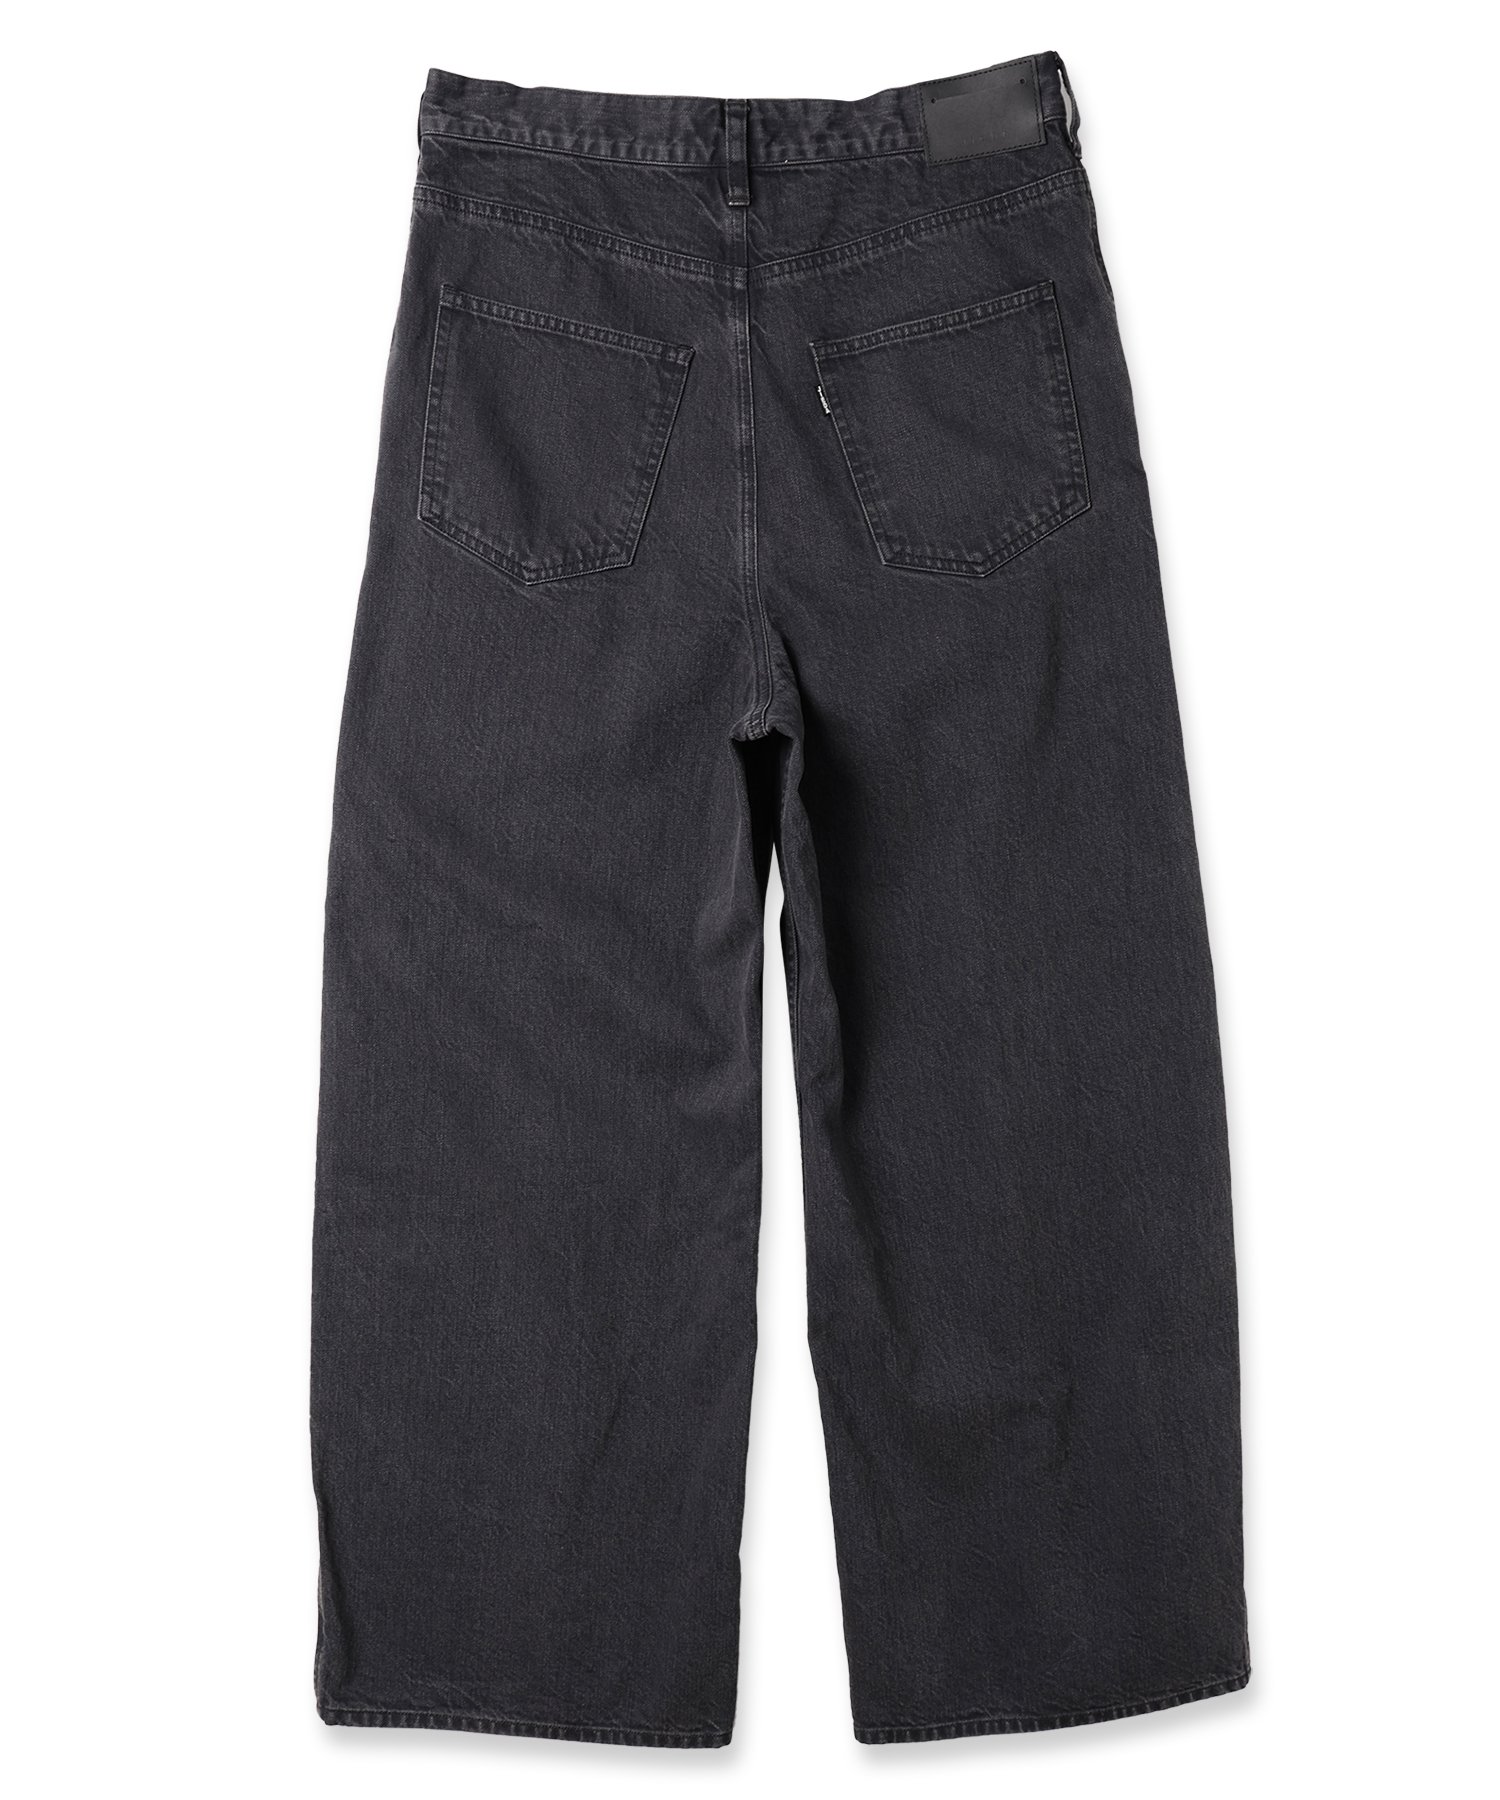 JieDa<br />CUTTING WIDE DENIM / BLACK<img class='new_mark_img2' src='https://img.shop-pro.jp/img/new/icons47.gif' style='border:none;display:inline;margin:0px;padding:0px;width:auto;' />